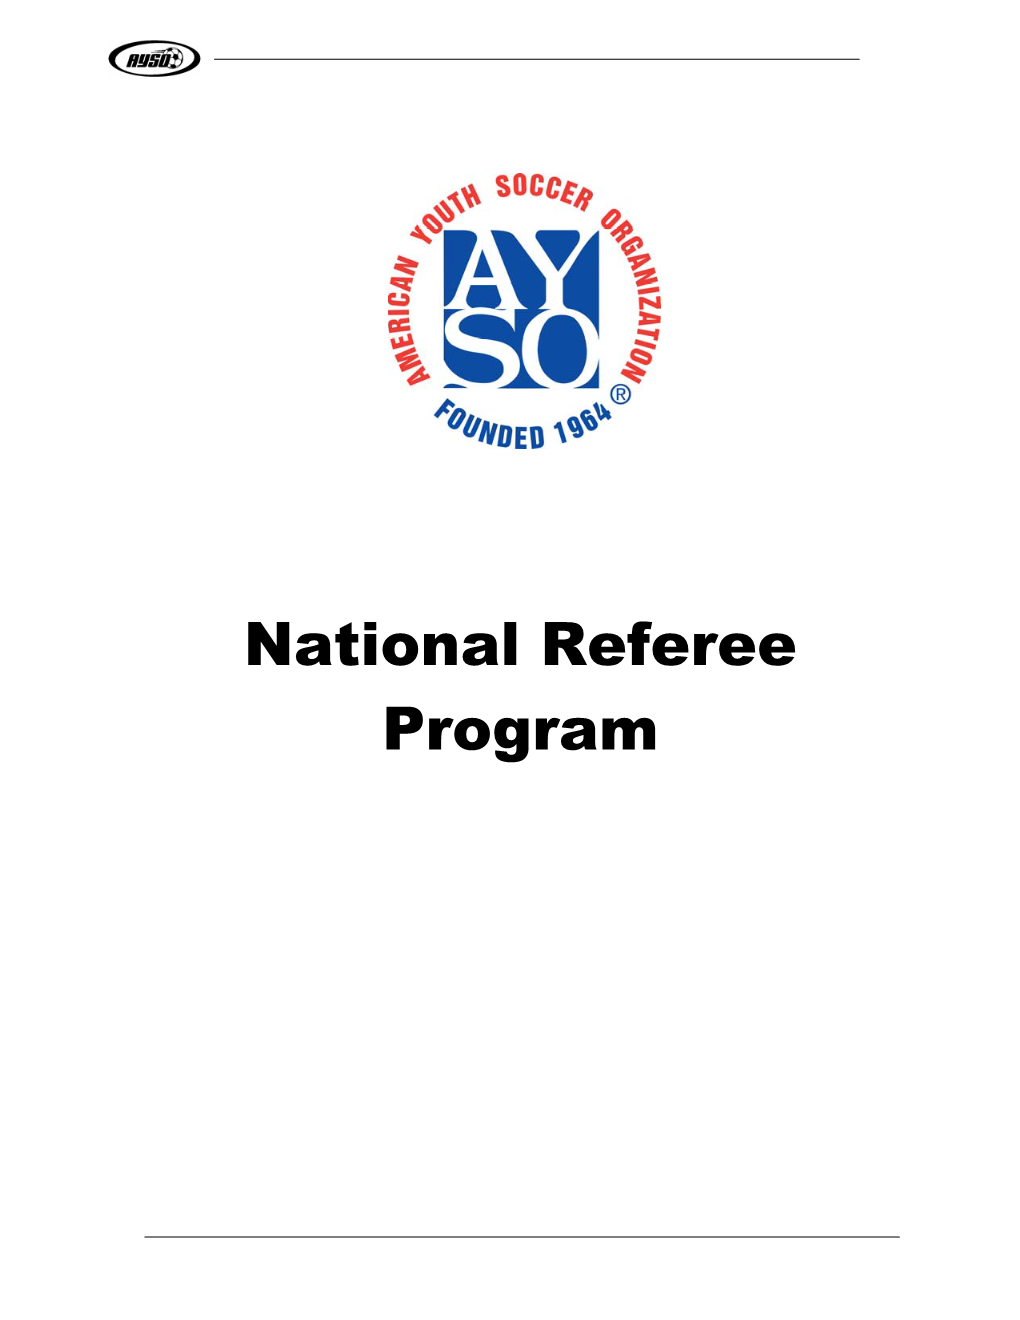 National Referee Program Manual” Is Referenced